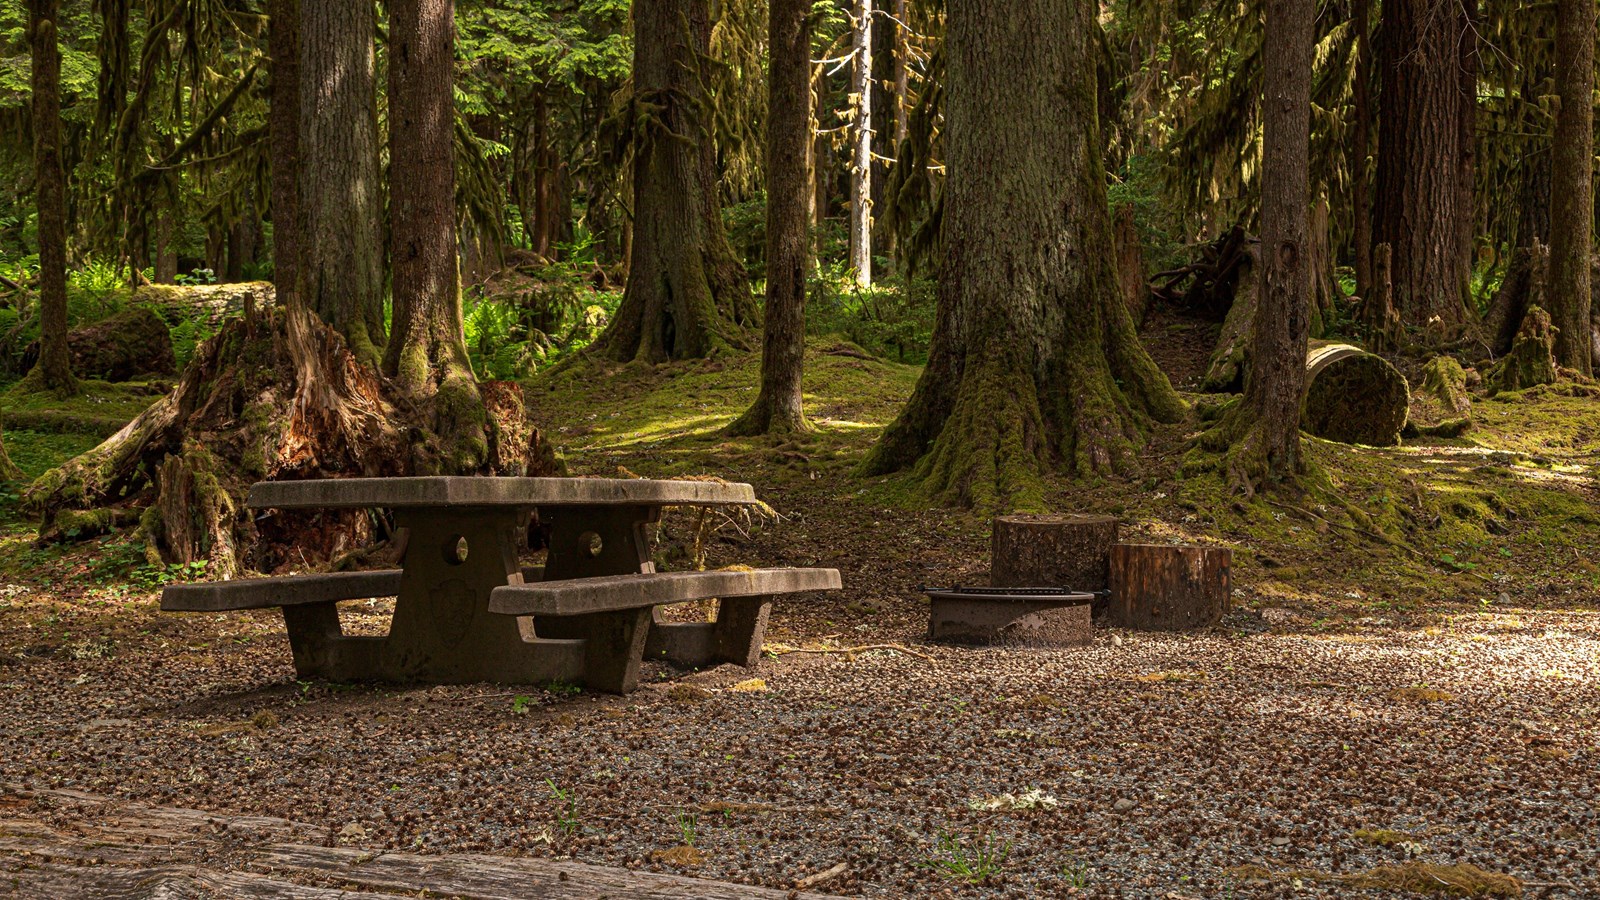 A campsite with picnic table in a mossy forest setting.